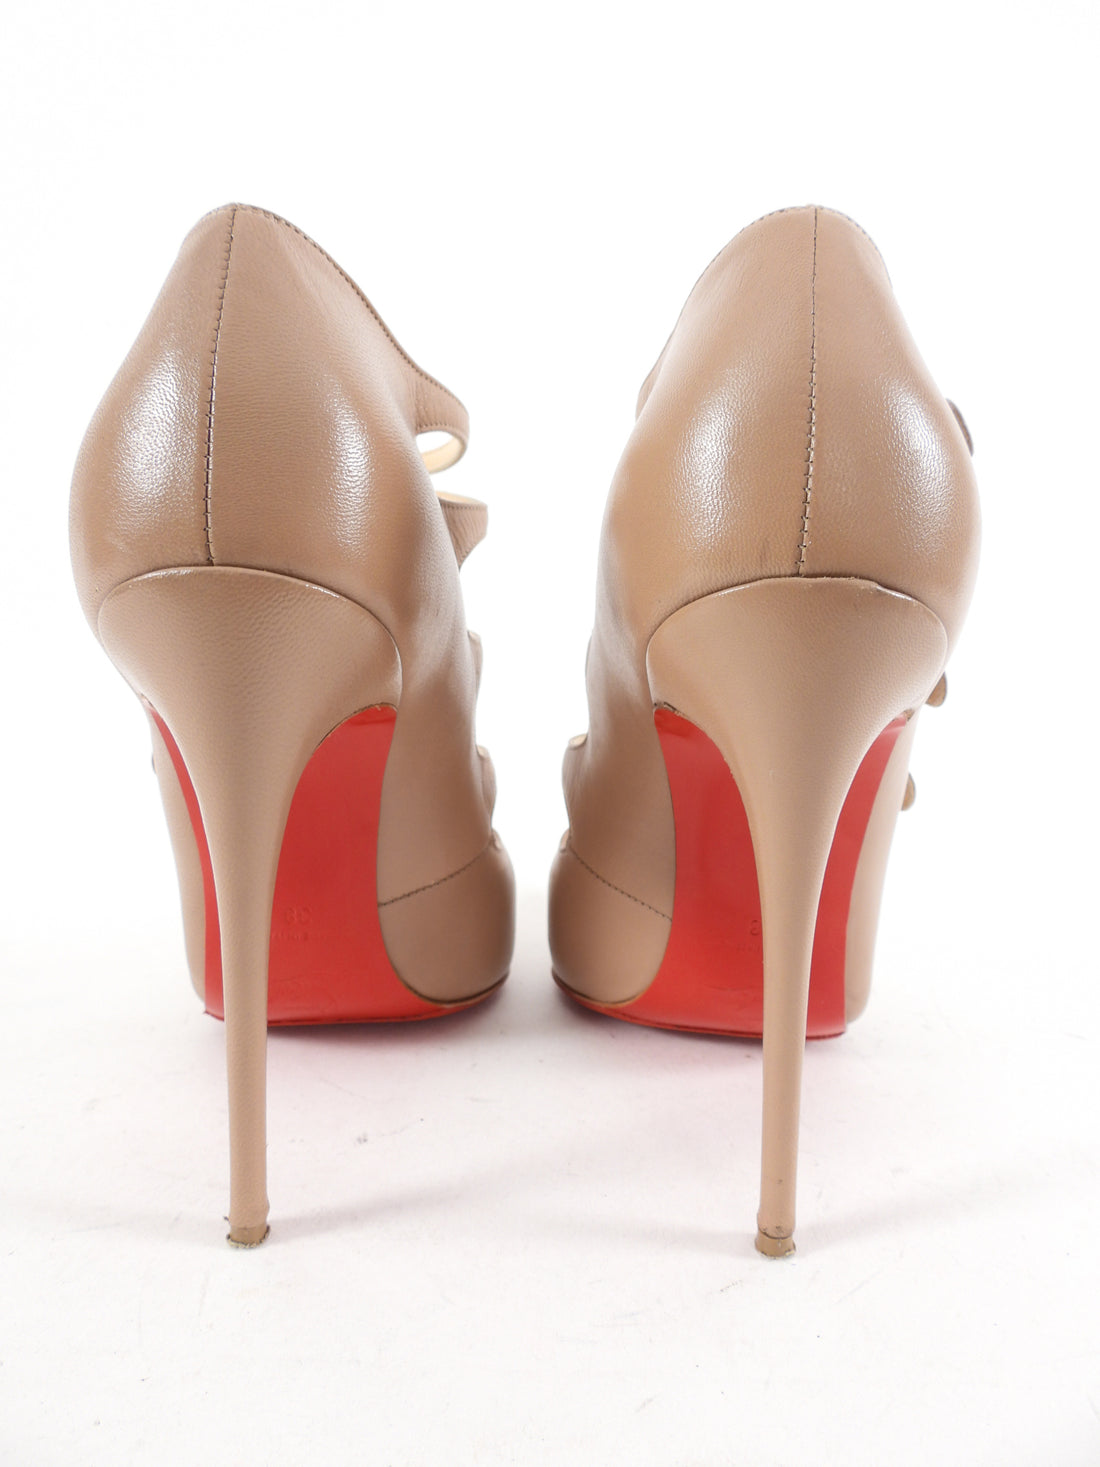 Louboutin Viennana 120mm Strappy Pump in Dune - 7.5